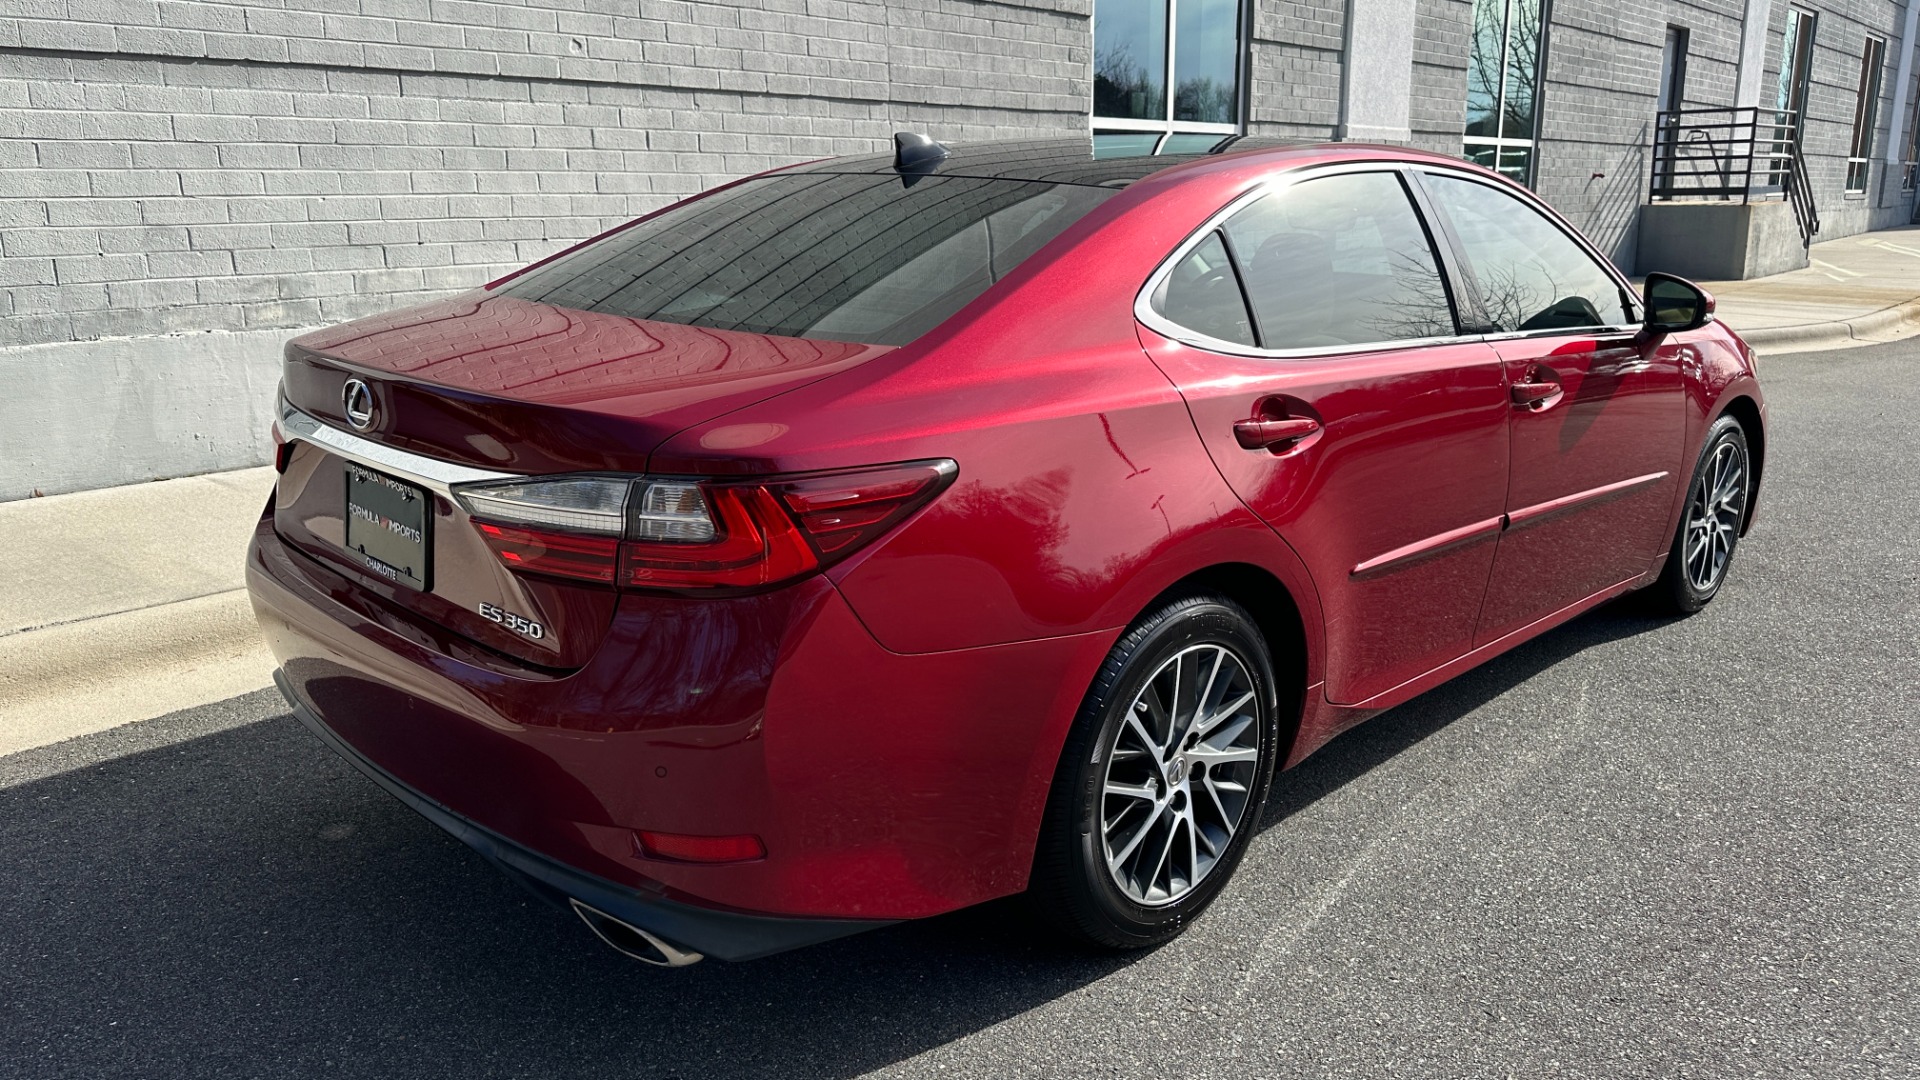 Used 2018 Lexus ES ES 350 / LUXURY PKG / PANORAMIC ROOF / NAV PACKAGE / LED LIGHTS for sale $24,595 at Formula Imports in Charlotte NC 28227 4